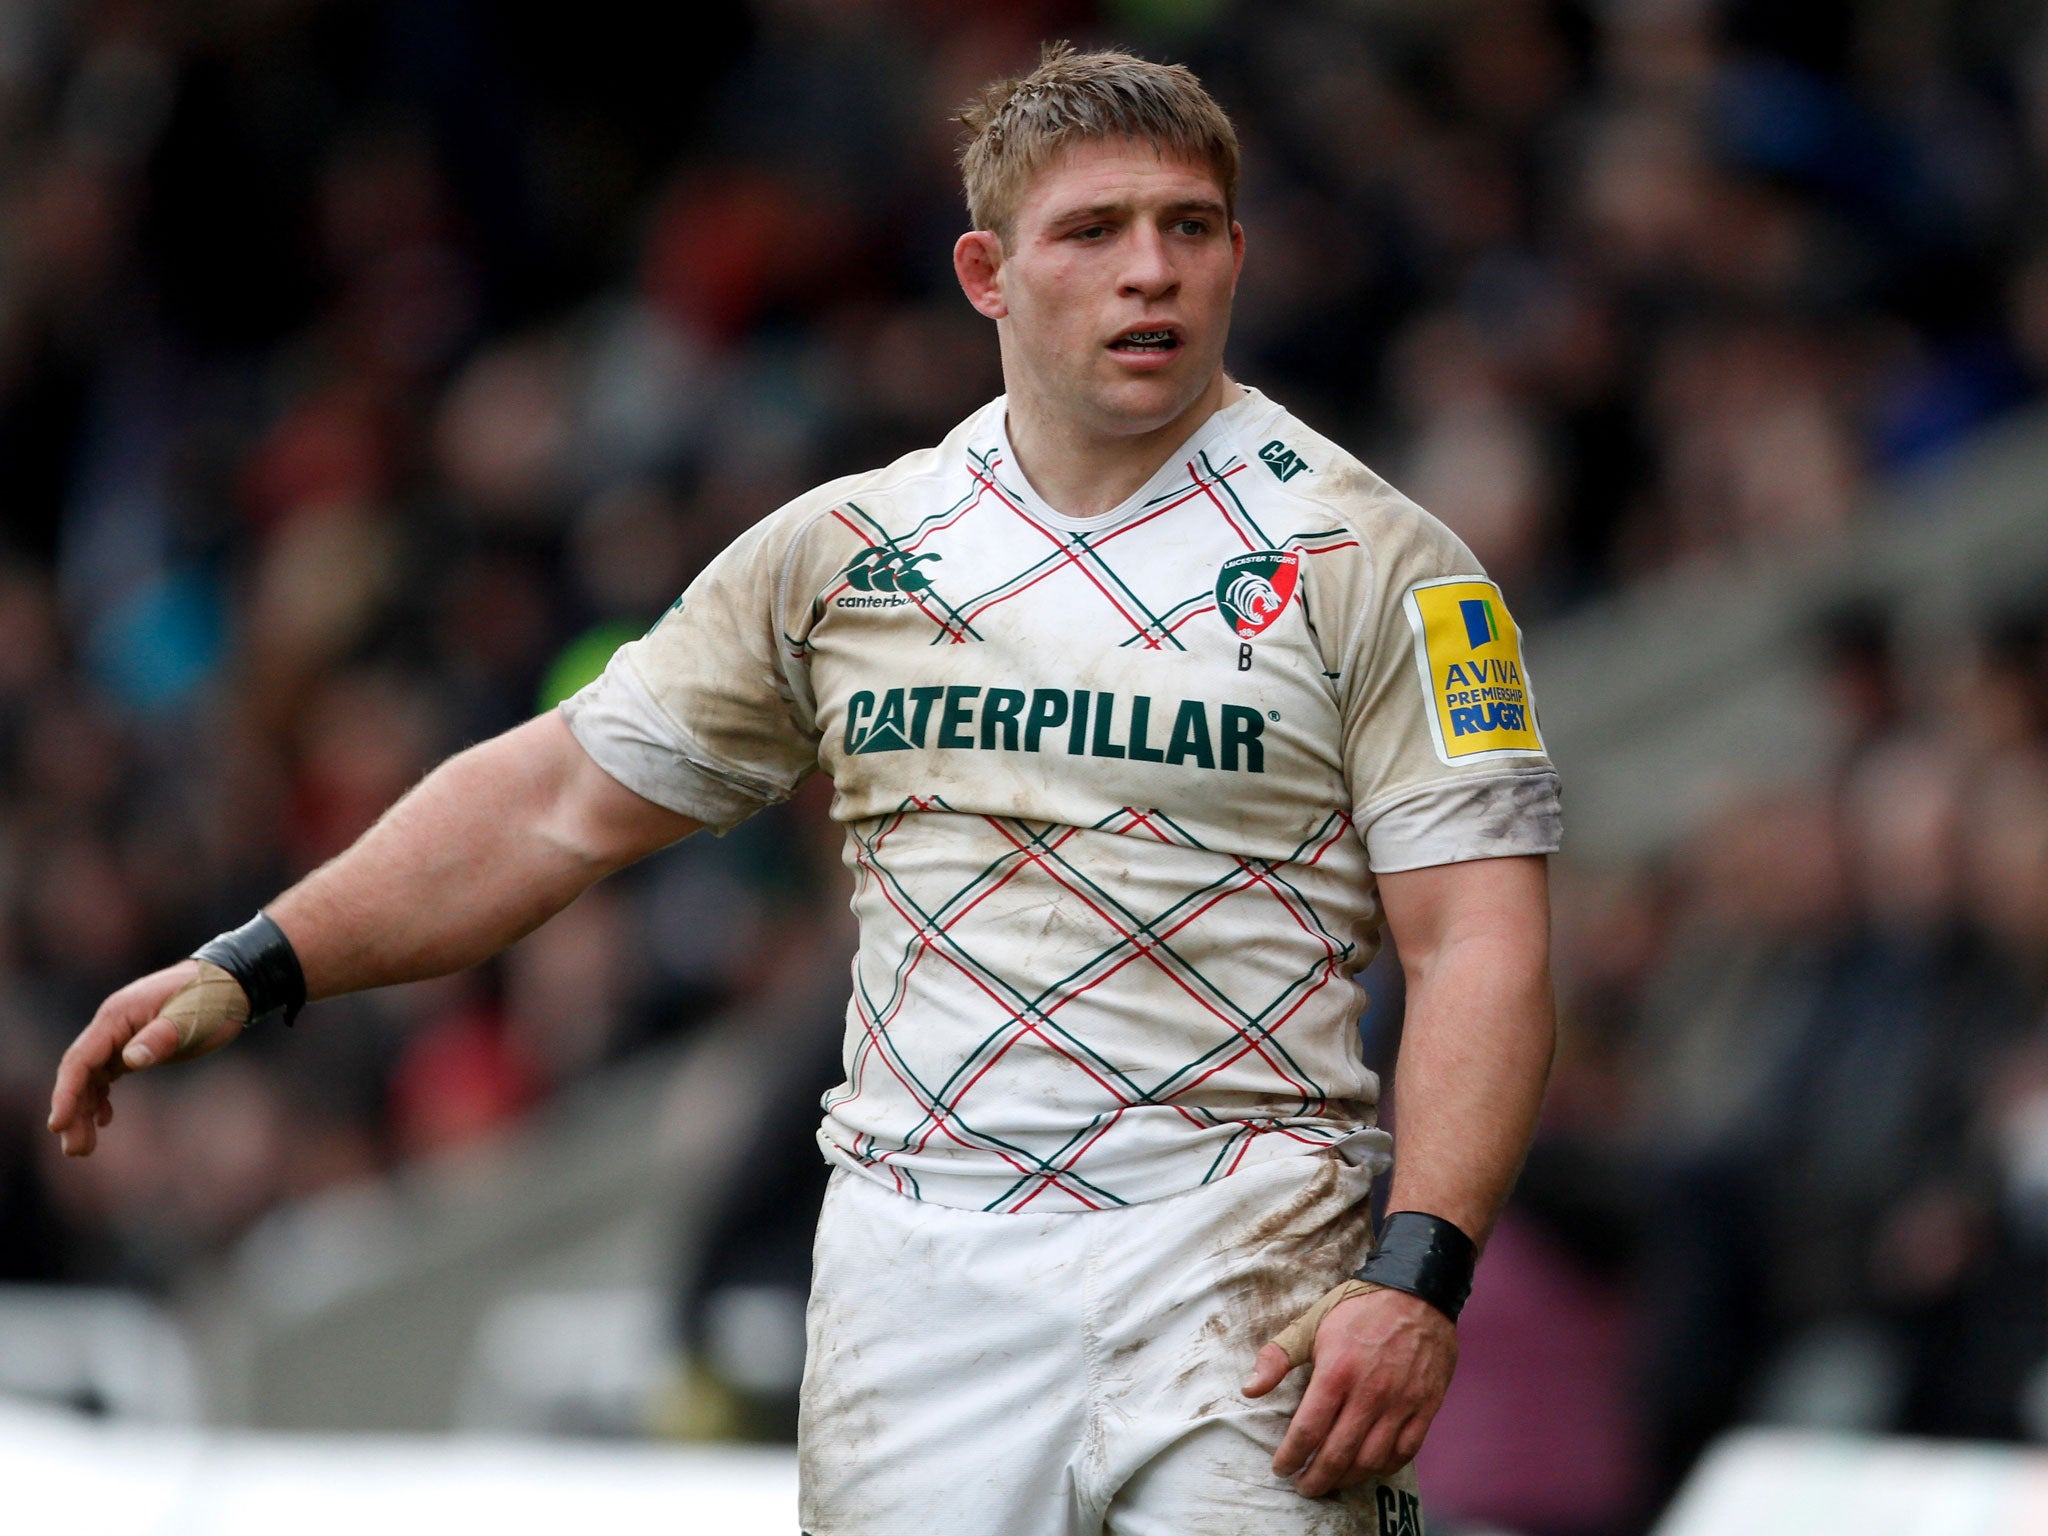 Leicester hooker Tom Youngs complained he had been bitten by an unnamed Saints player